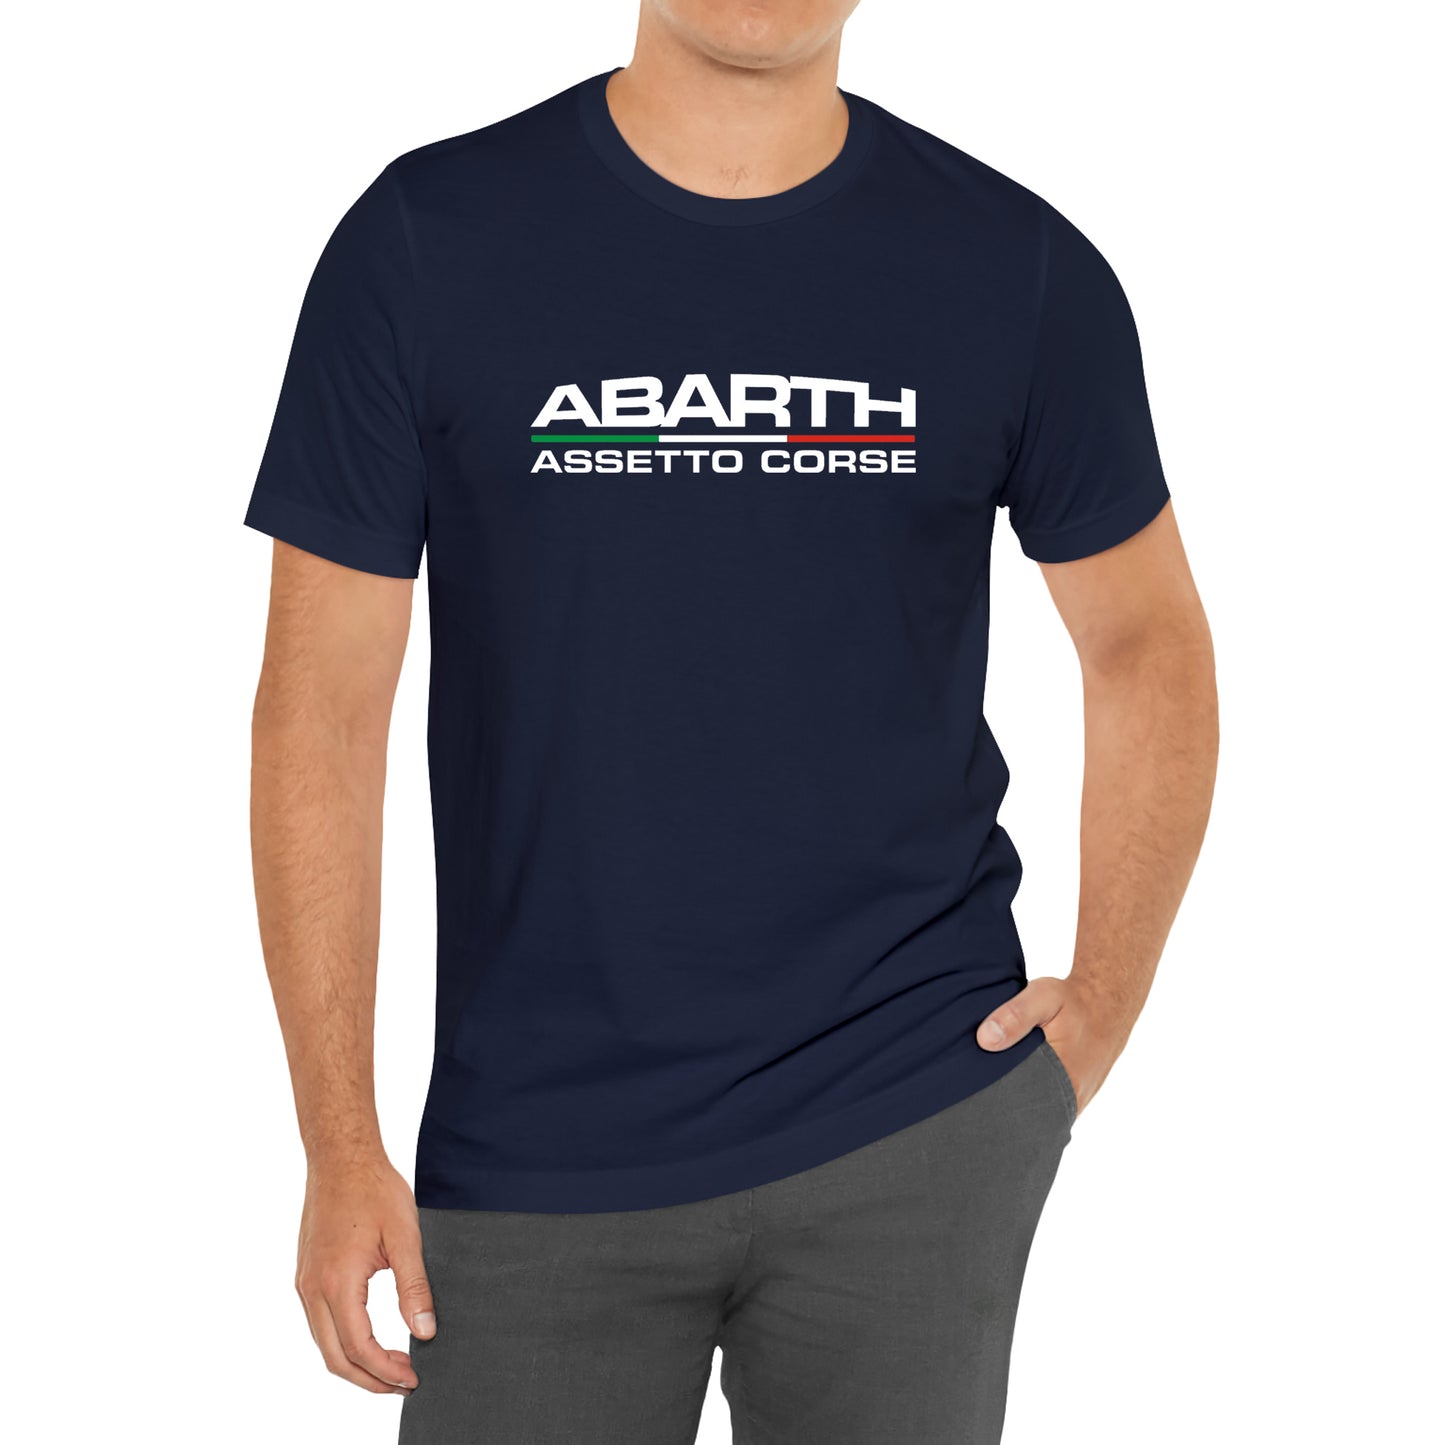 Abarth Assetto Corse Racing T-Shirt Size S to 3XL